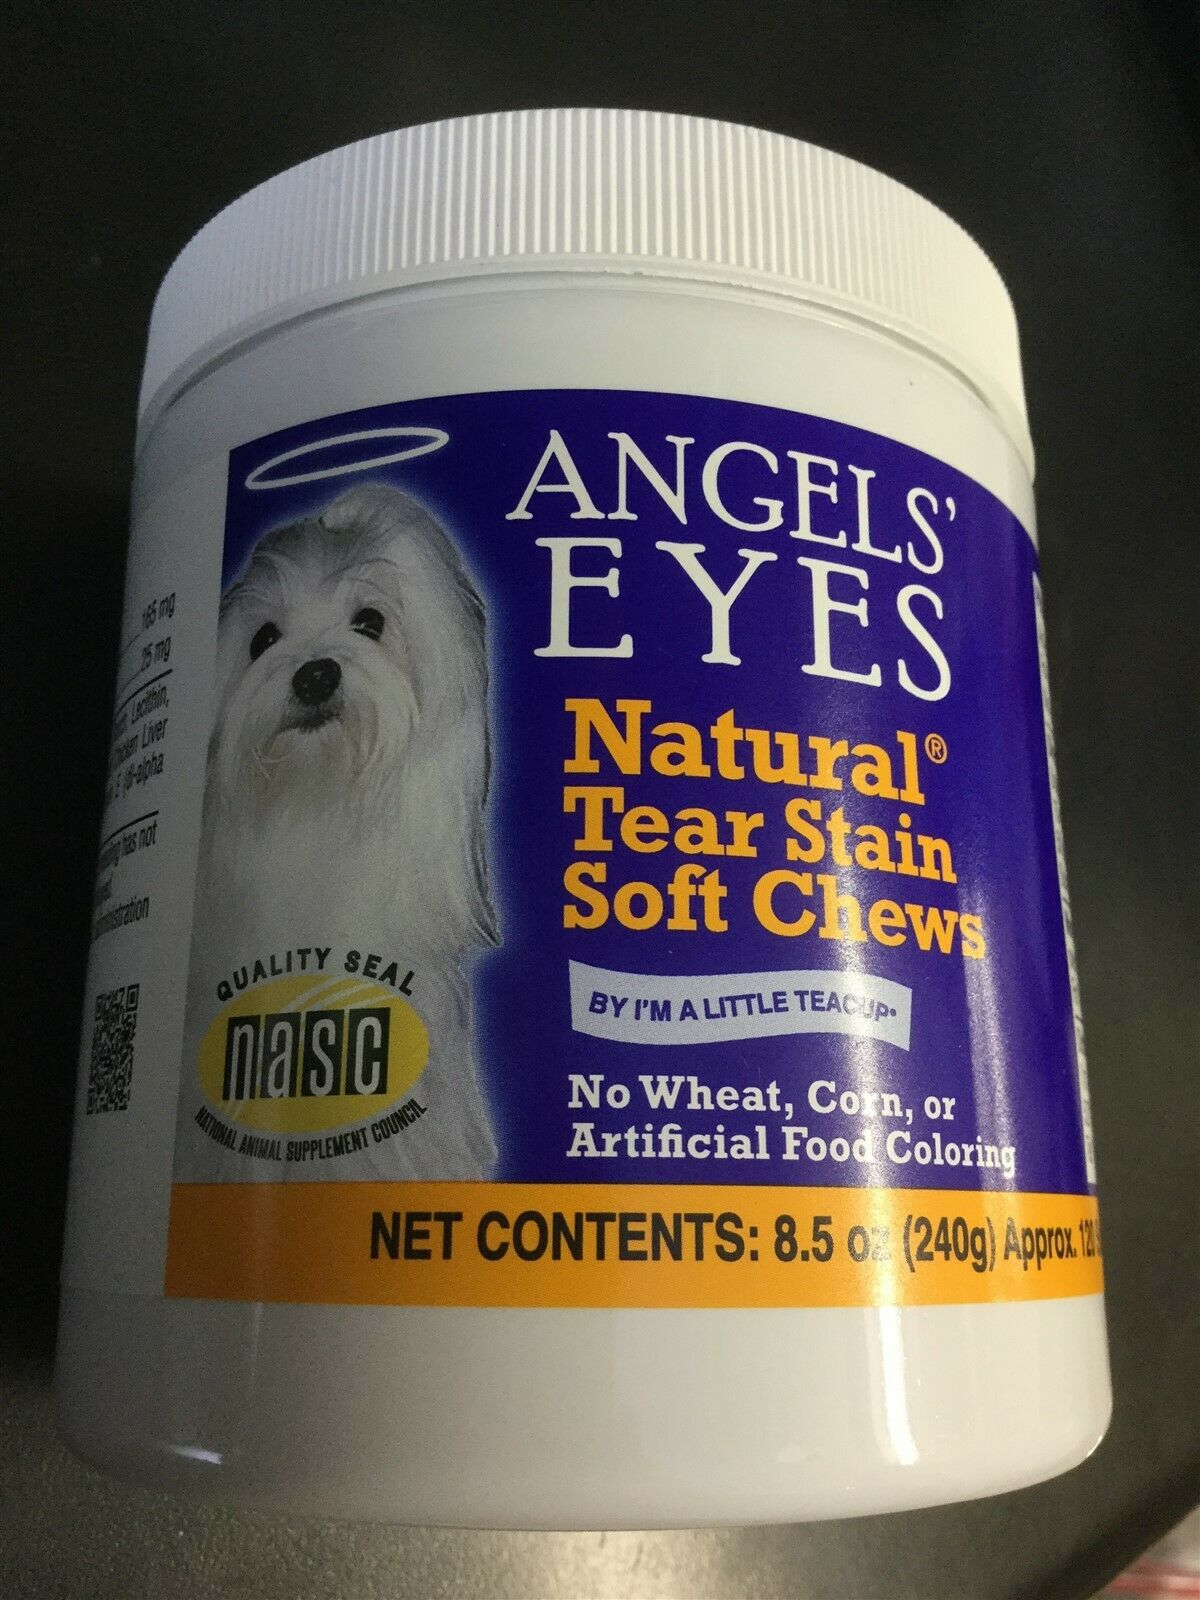 Angels' Eyes Natural Tear Stain Chews 120 Soft Chews 11/2021+ #5138